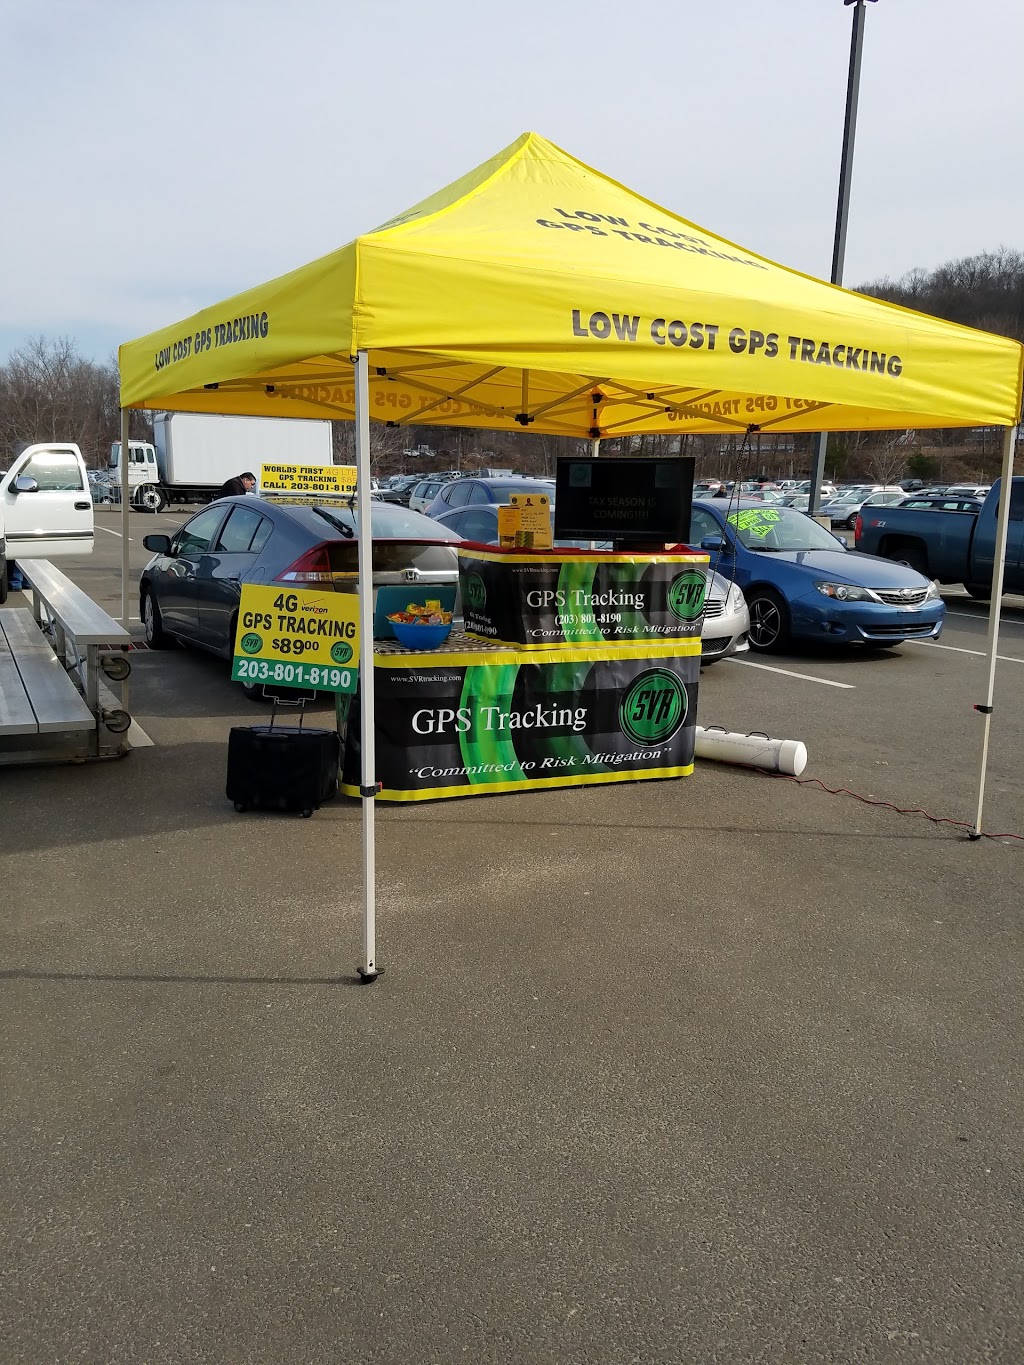 Statewide Auto Auction | 1756 N Broad St, Meriden, CT 06450 | Phone: (203) 237-1975